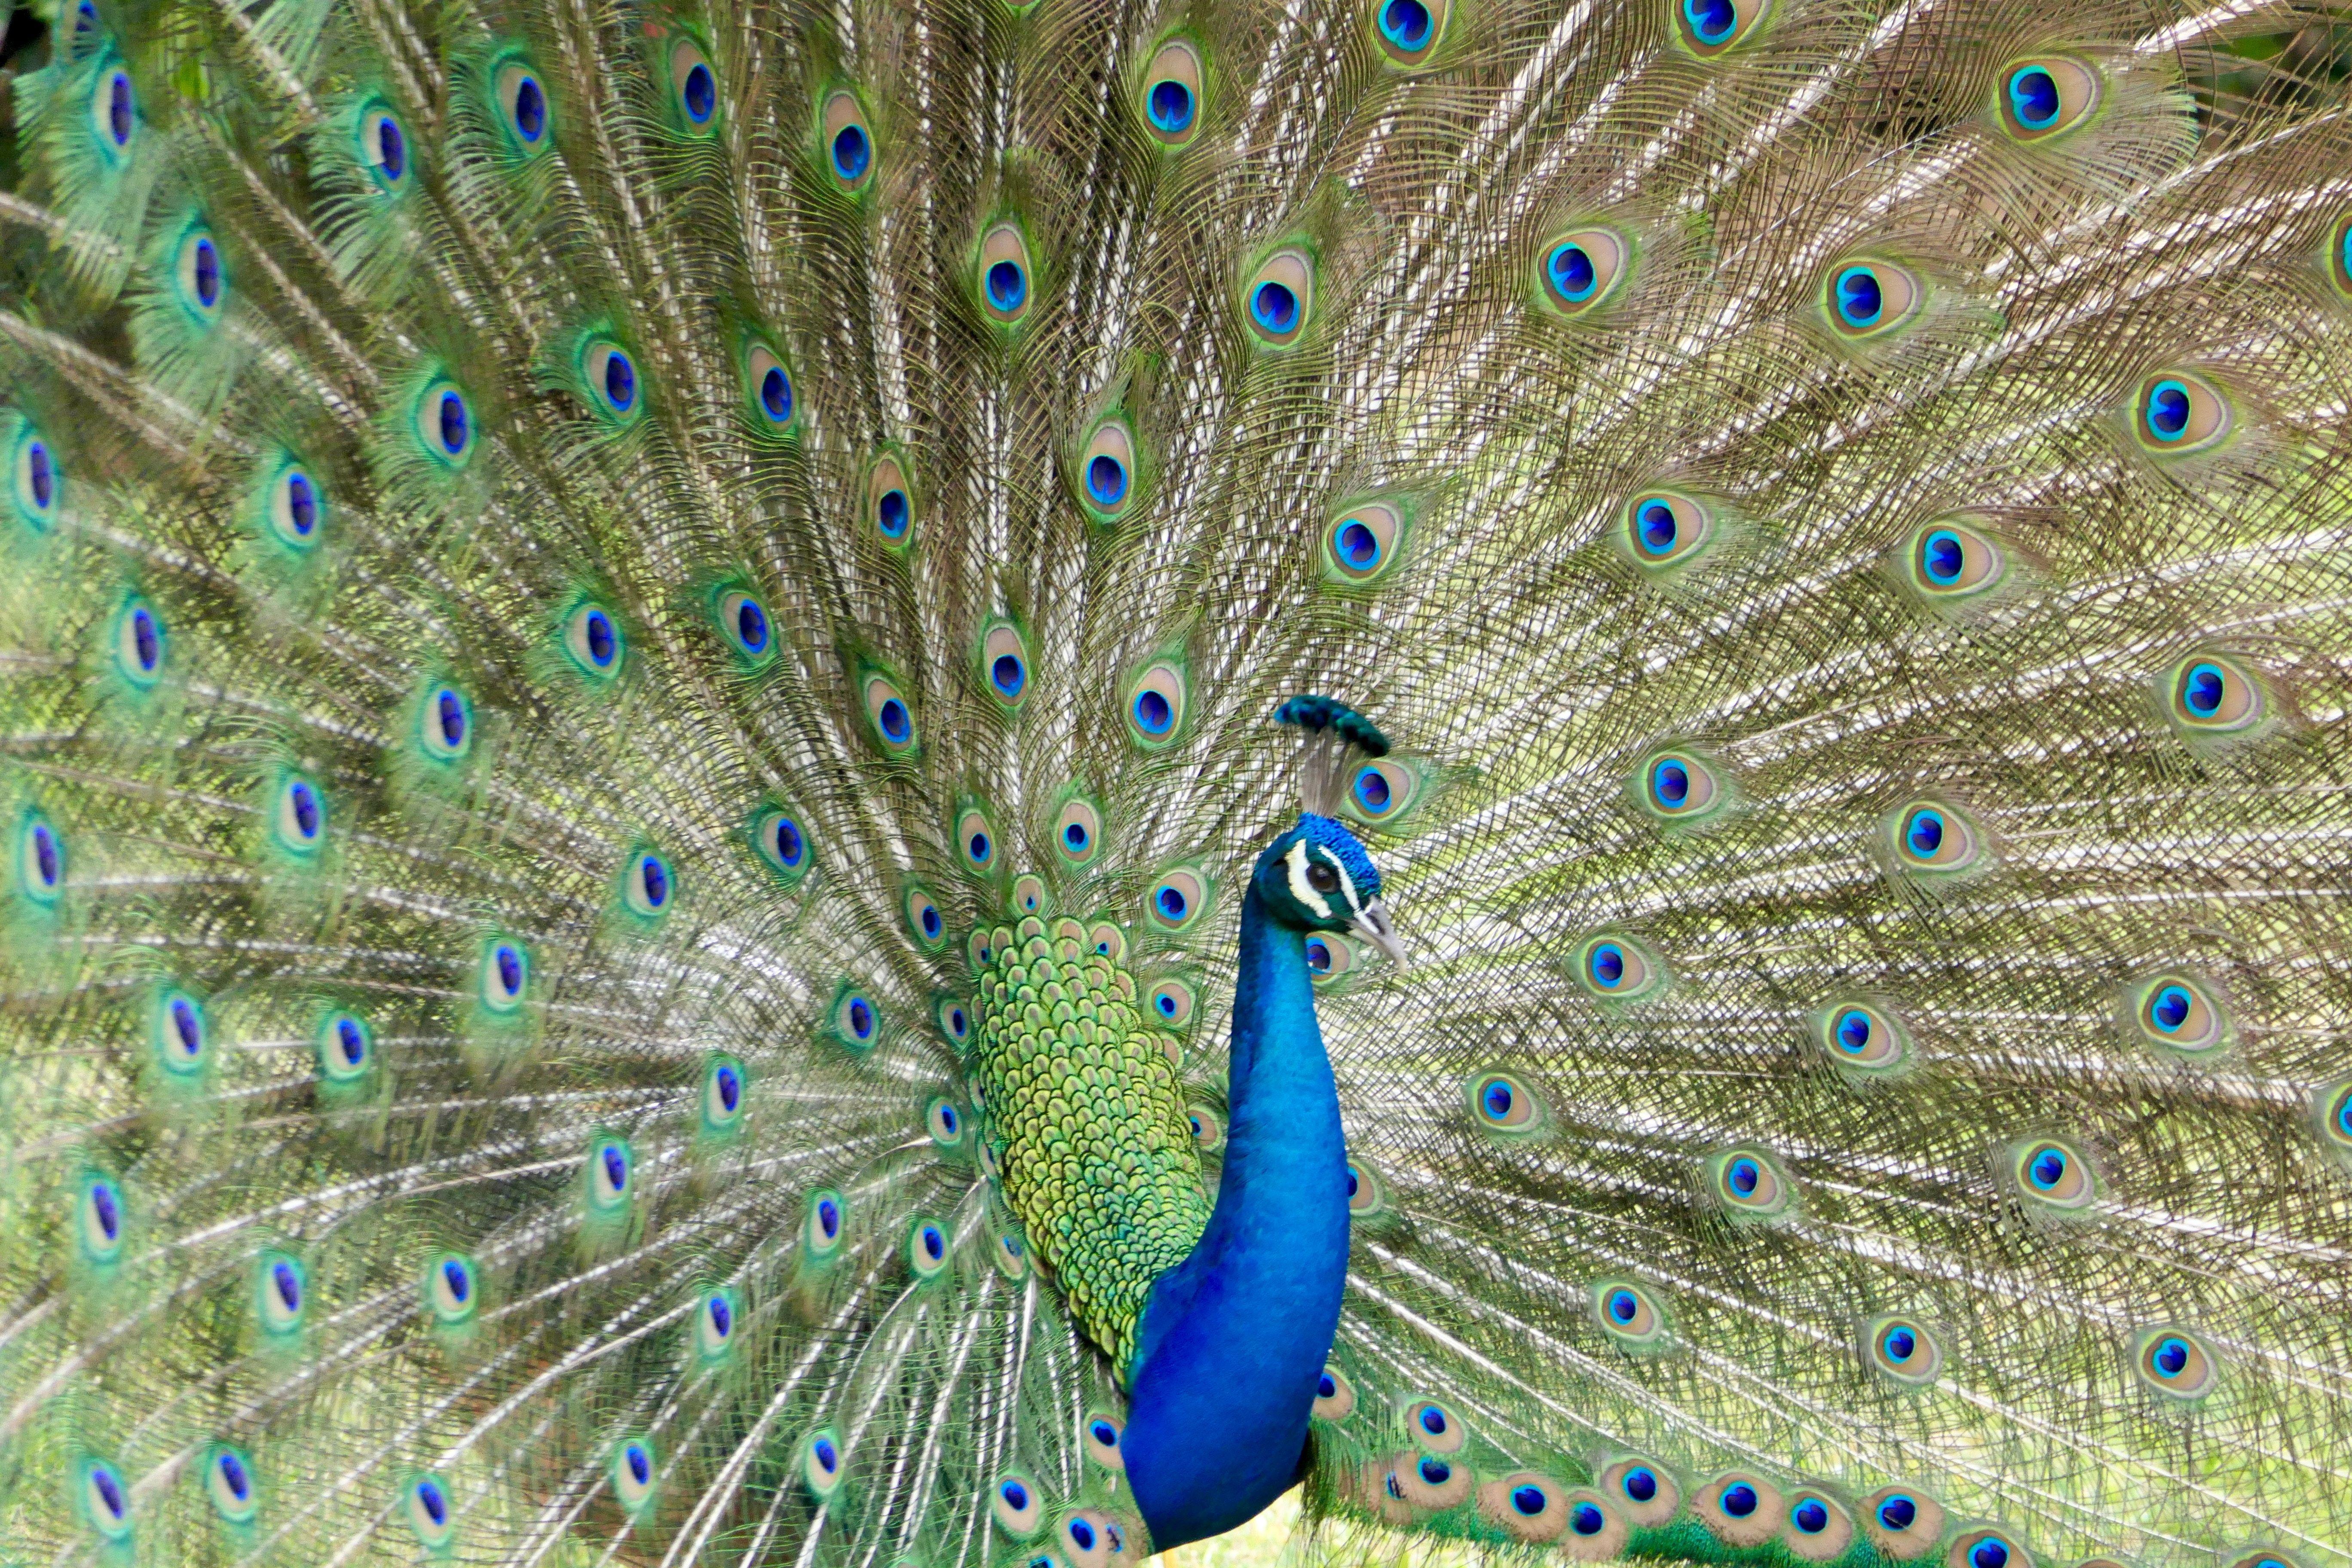 Blue Green Bird Logo - Peacock Picture [HD]. Download Free Image